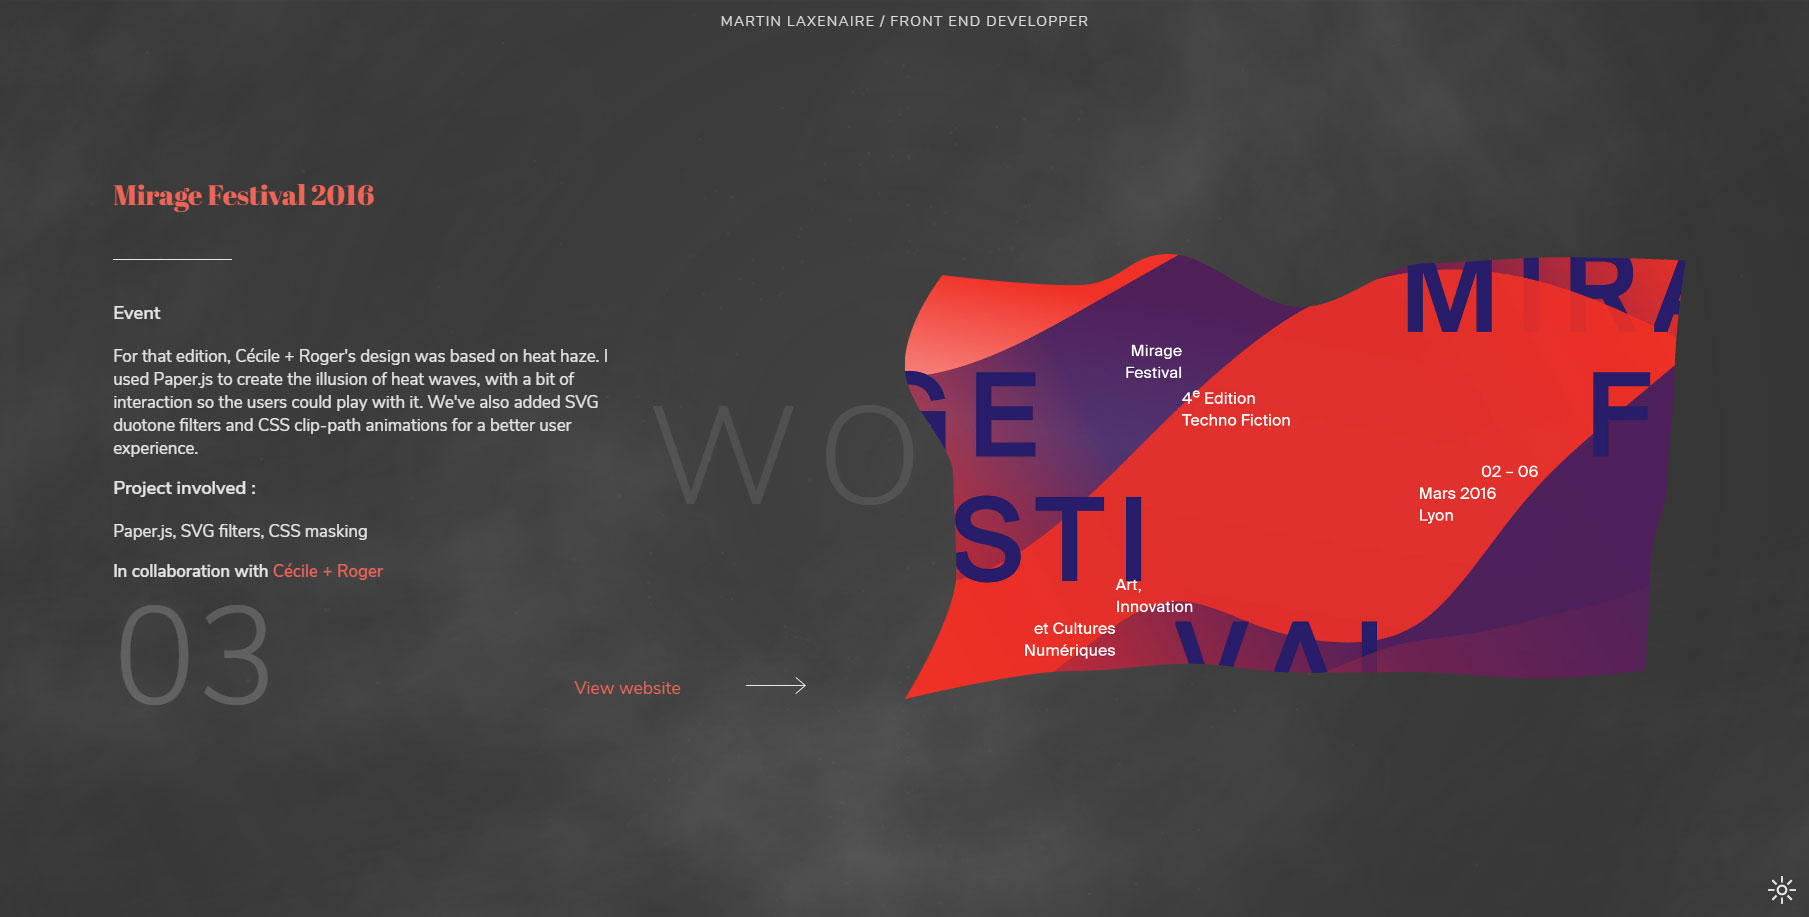 Martin Laxenaire - Website of the Day